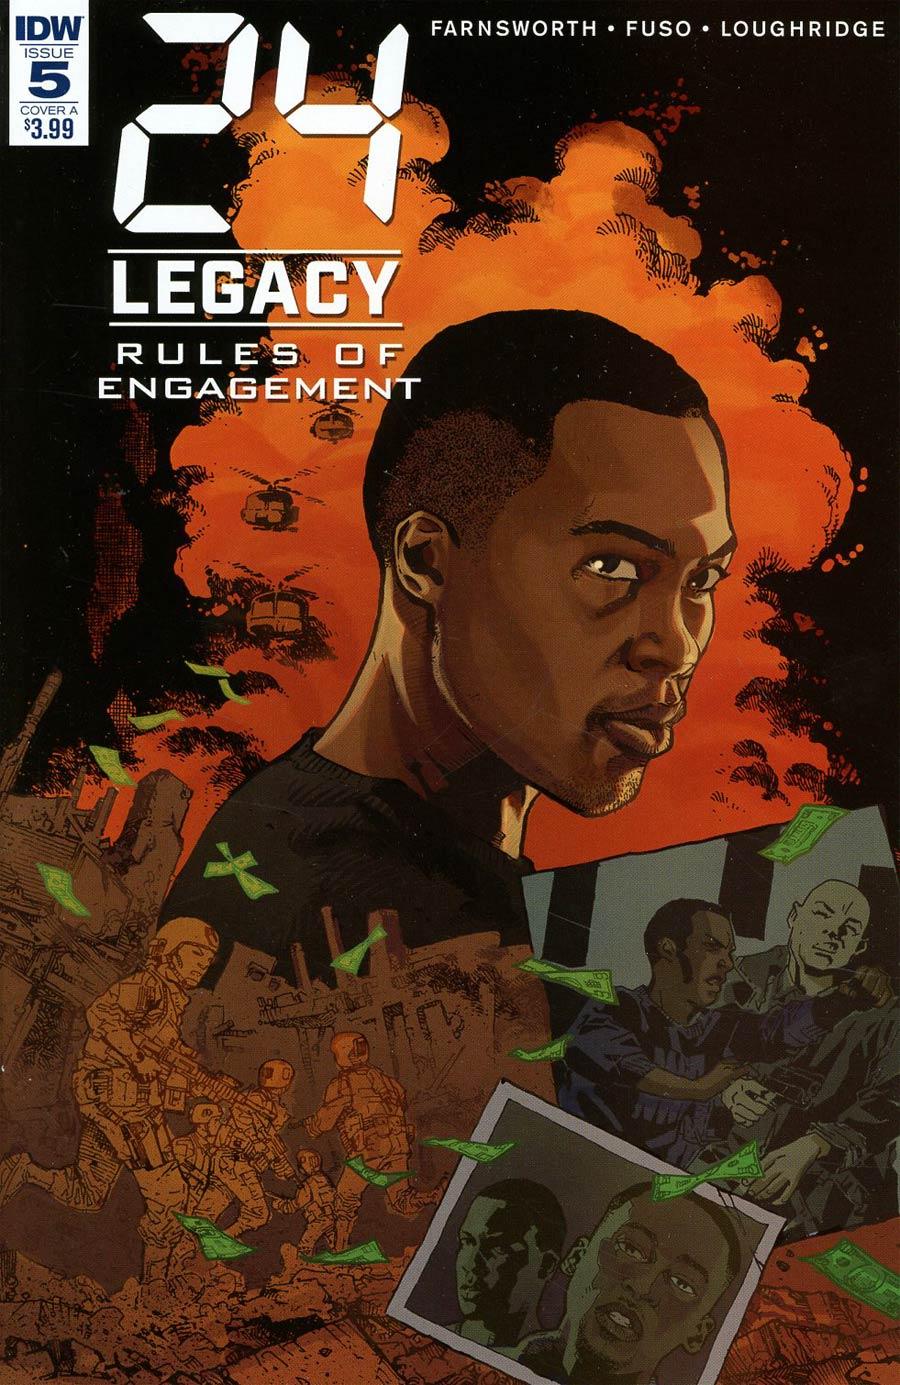 24 Legacy Rules Of Engagement Vol. 1 #5